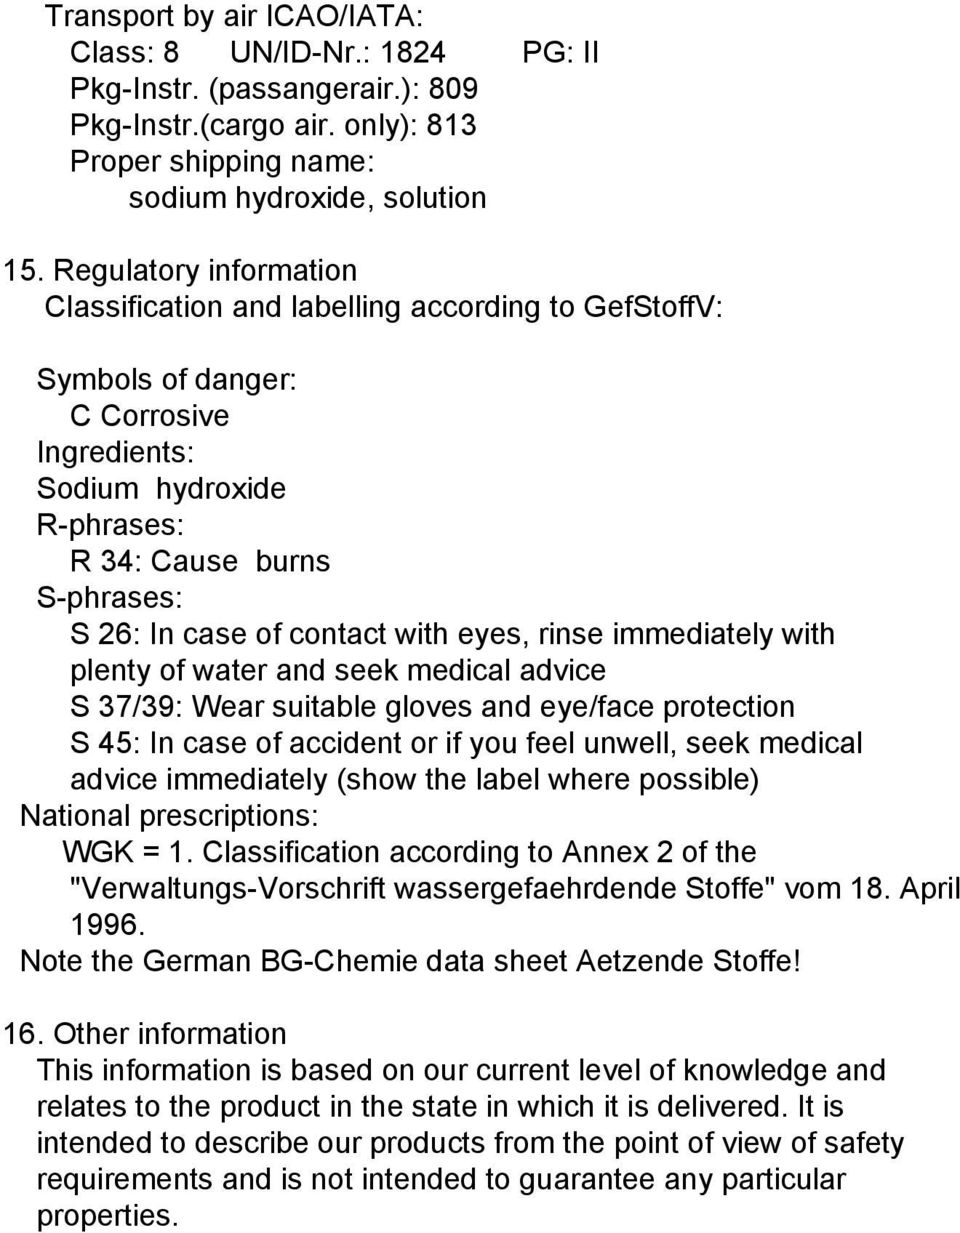 contact with eyes, rinse immediately with plenty of water and seek medical advice S 37/39: Wear suitable gloves and eye/face protection S 45: In case of accident or if you feel unwell, seek medical